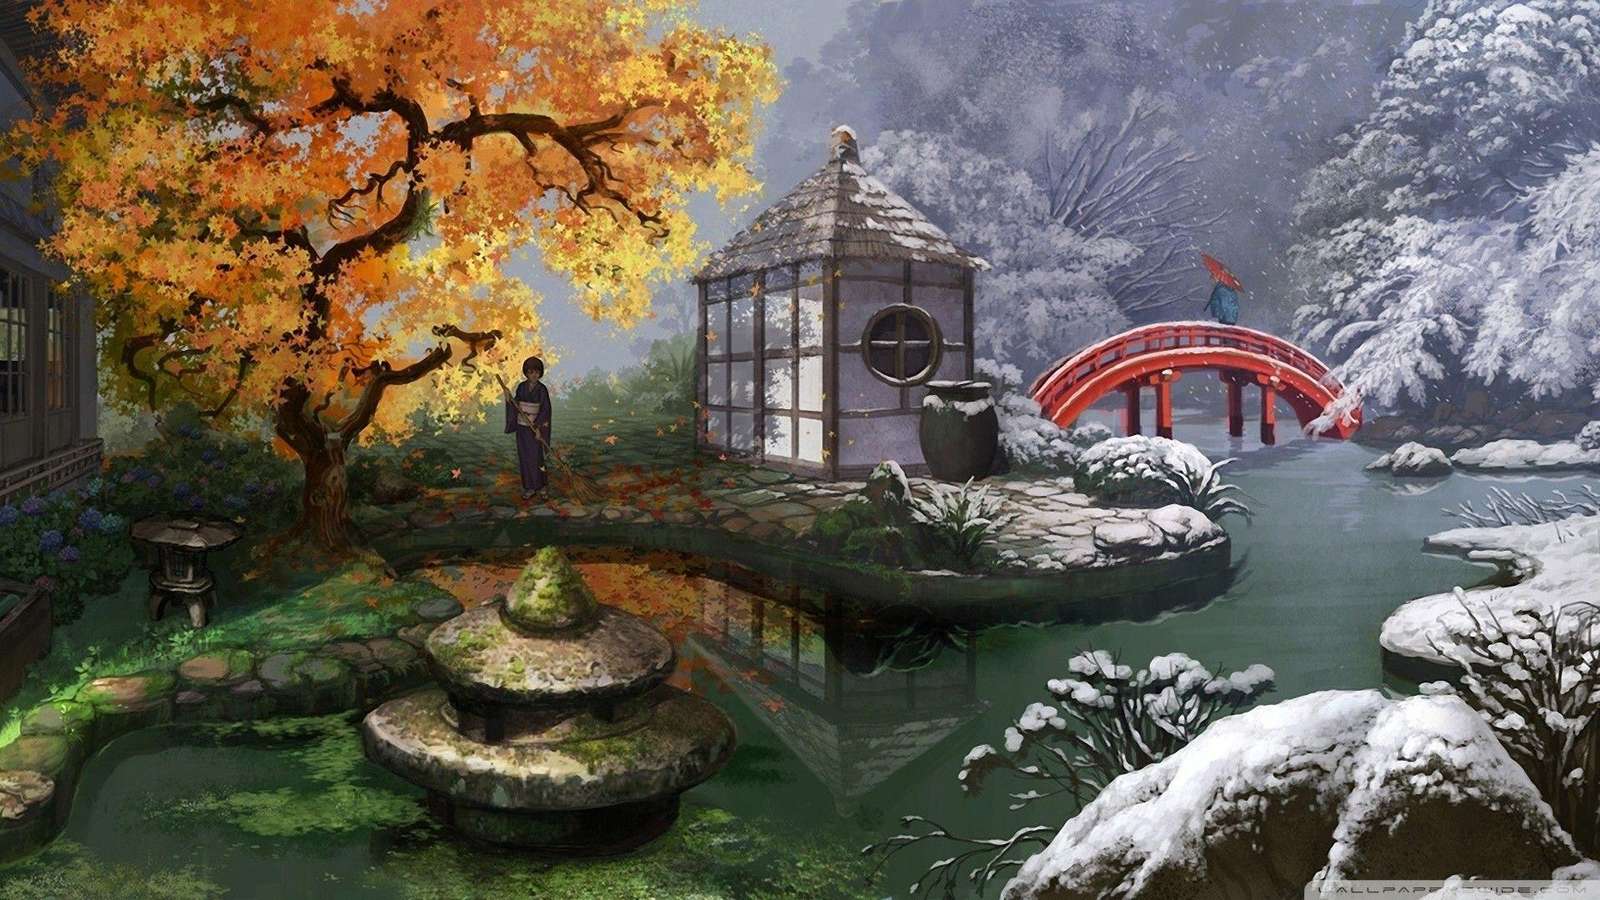 Garden in Japan puzzle online from photo